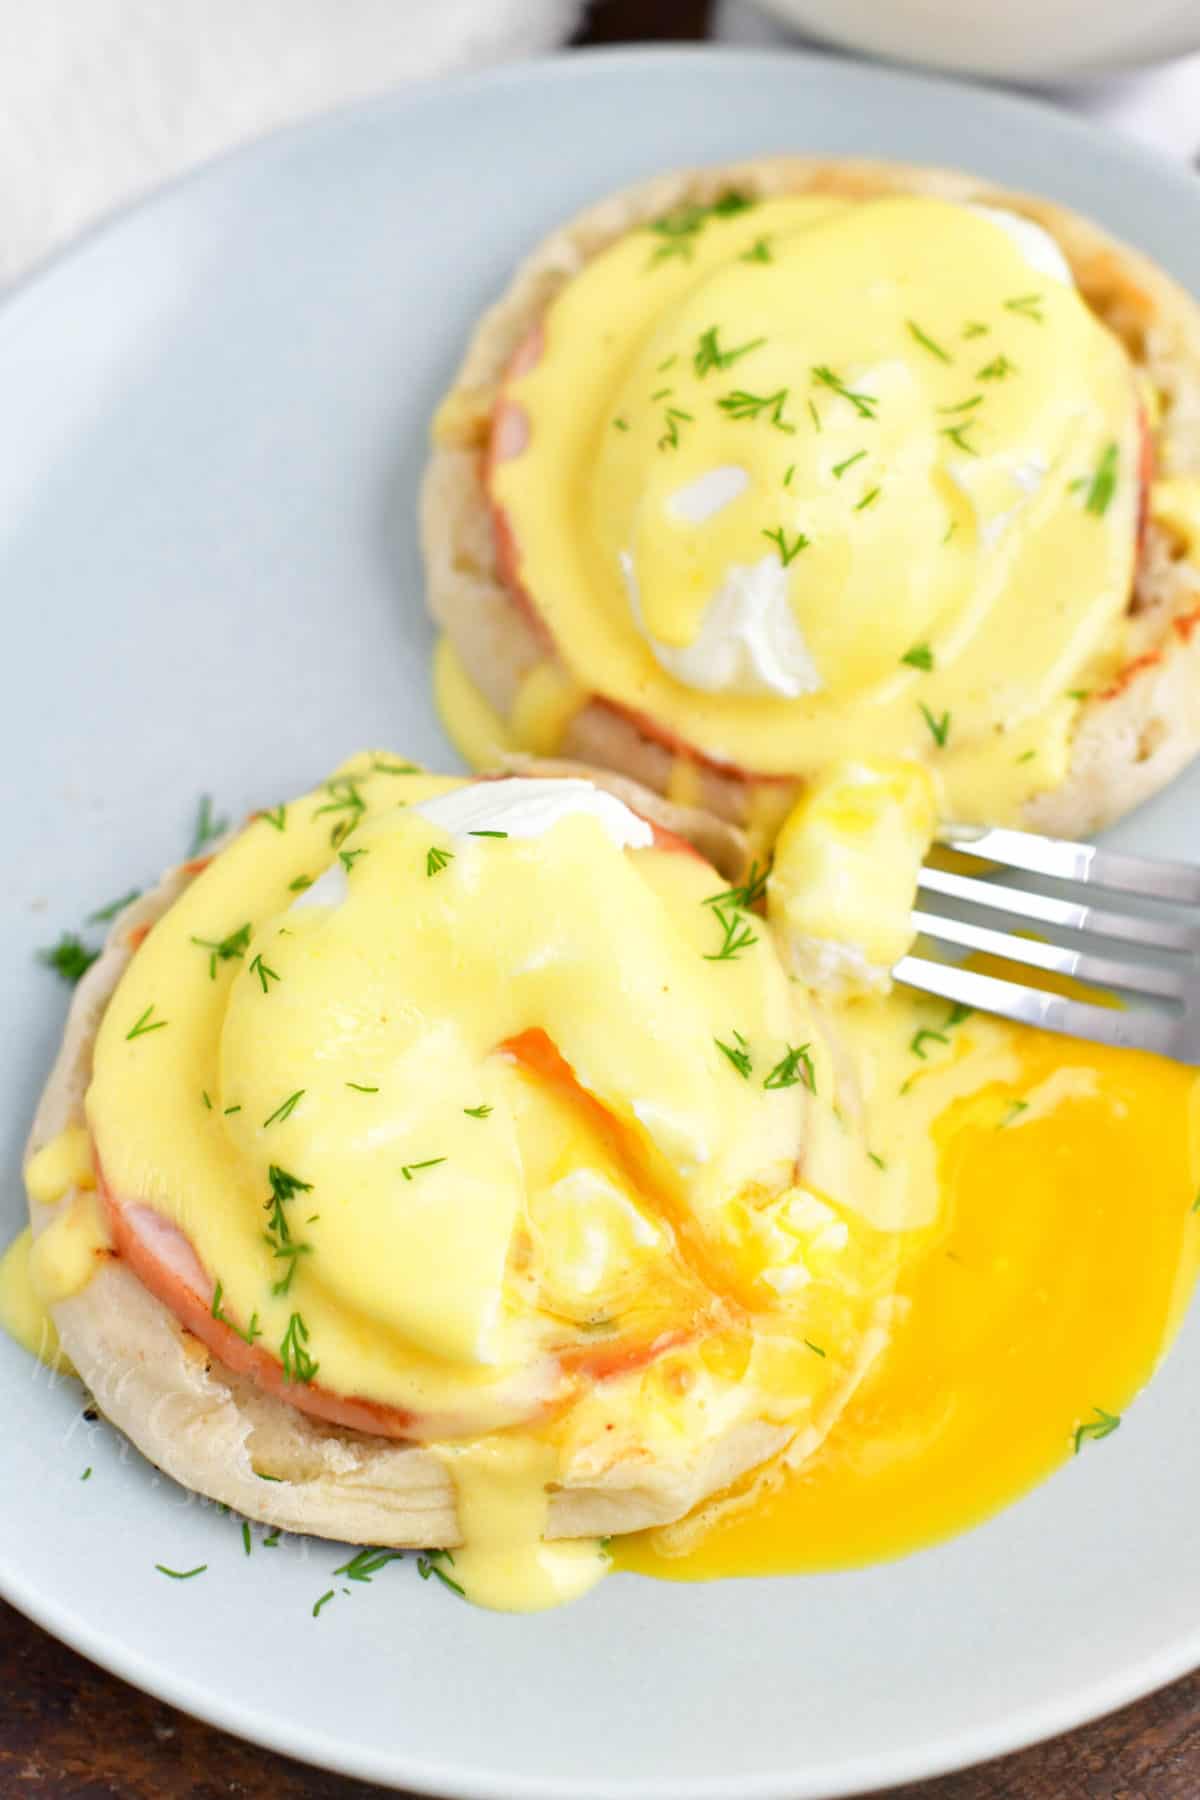 A fork has sliced into a serving of eggs Benedict, causing the yolk to run onto the white plate.